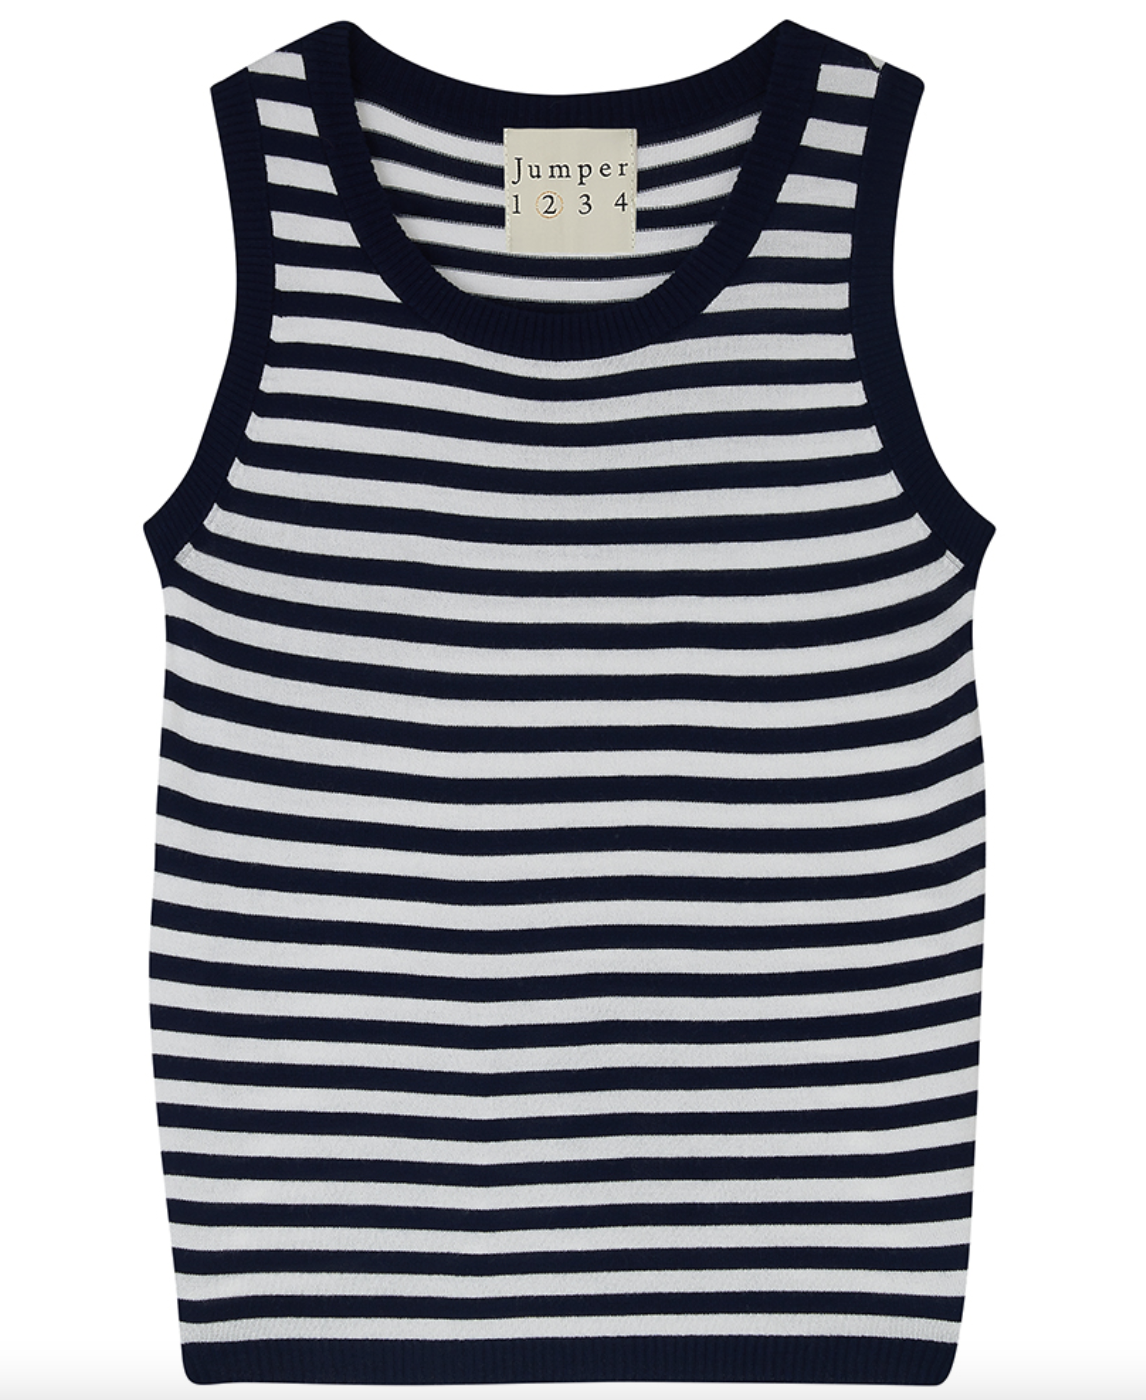 Little stripe tank navy and white